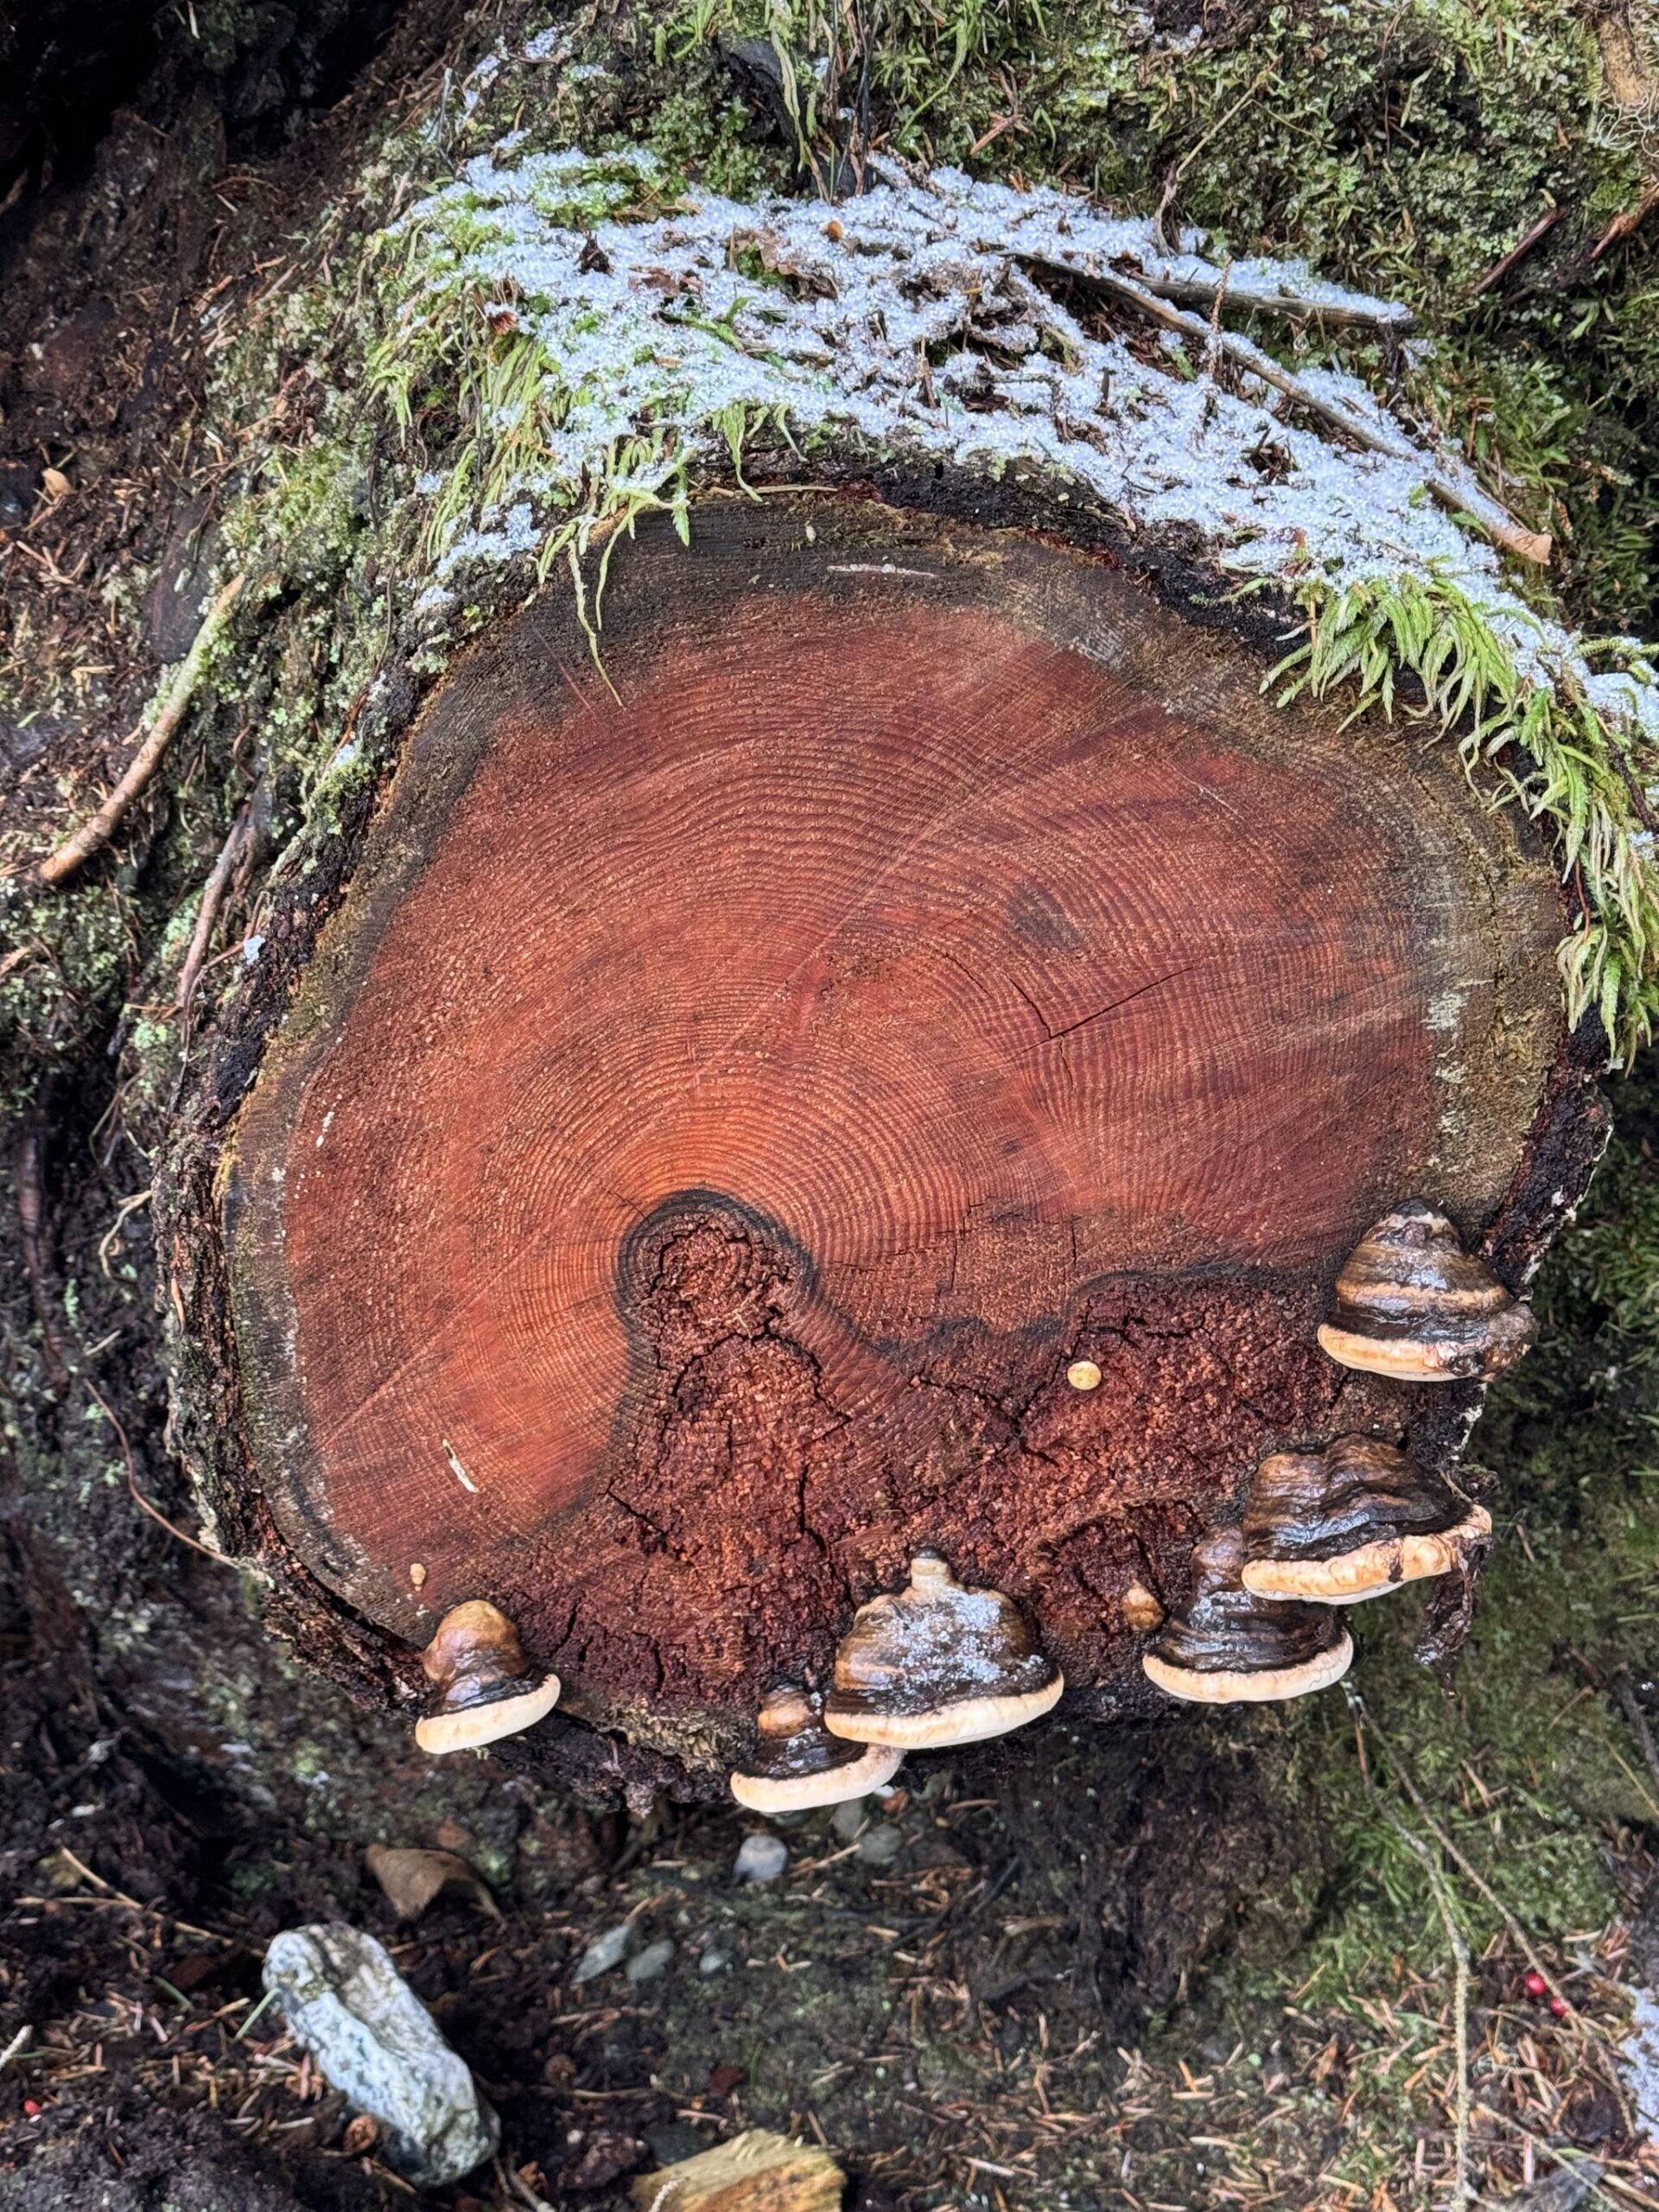 Mushrooms hug the edge of a stump along the Outer Point Trail on Jan. 2. (Photo by Deana Barajas)